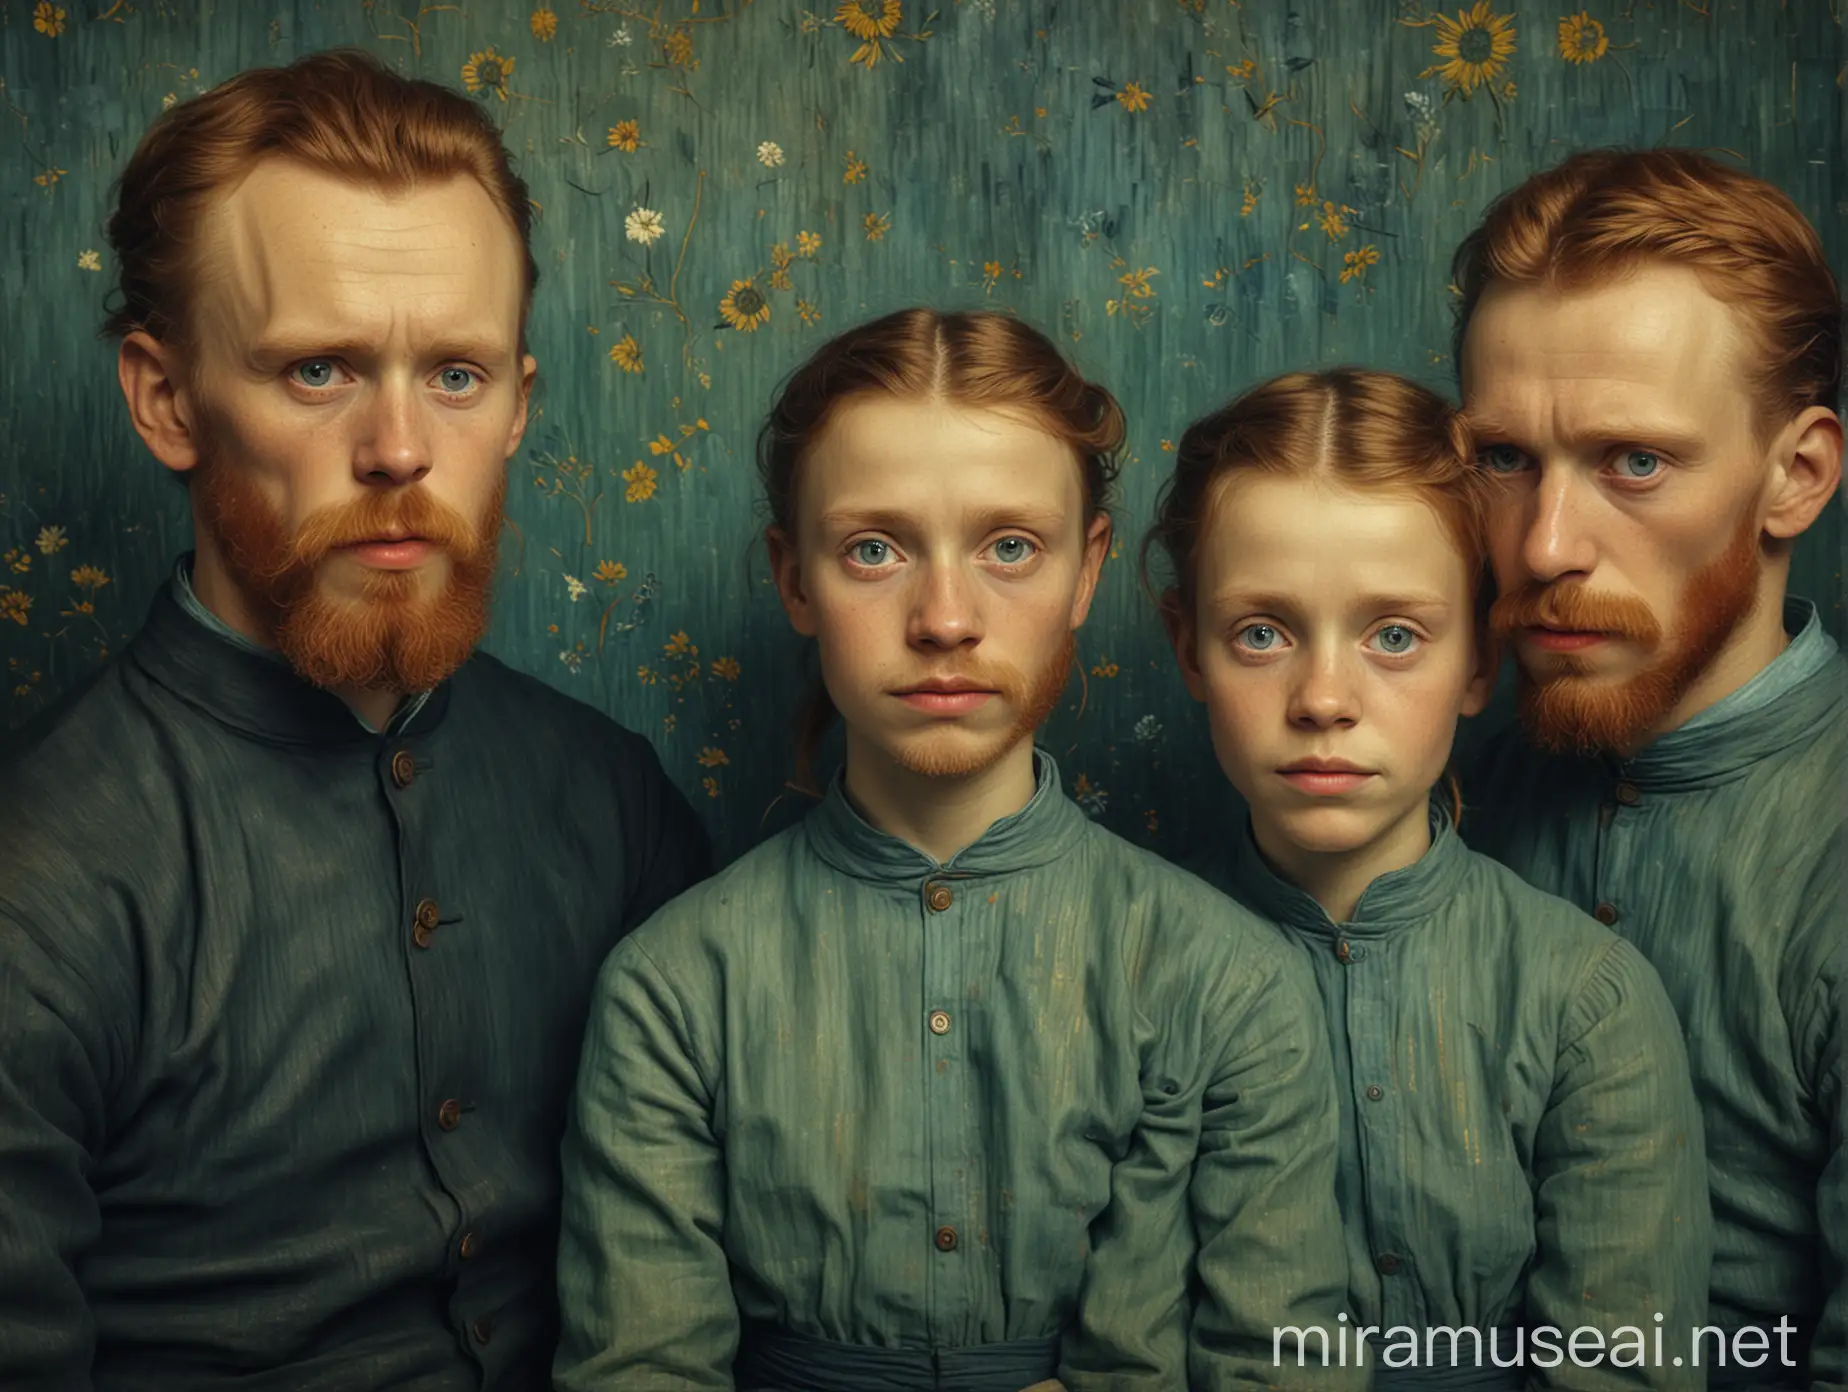 Make this uploaded image into the style of van Gogh, in the picture you see three brothers and one sister, the sister is the one on the right side , 8k